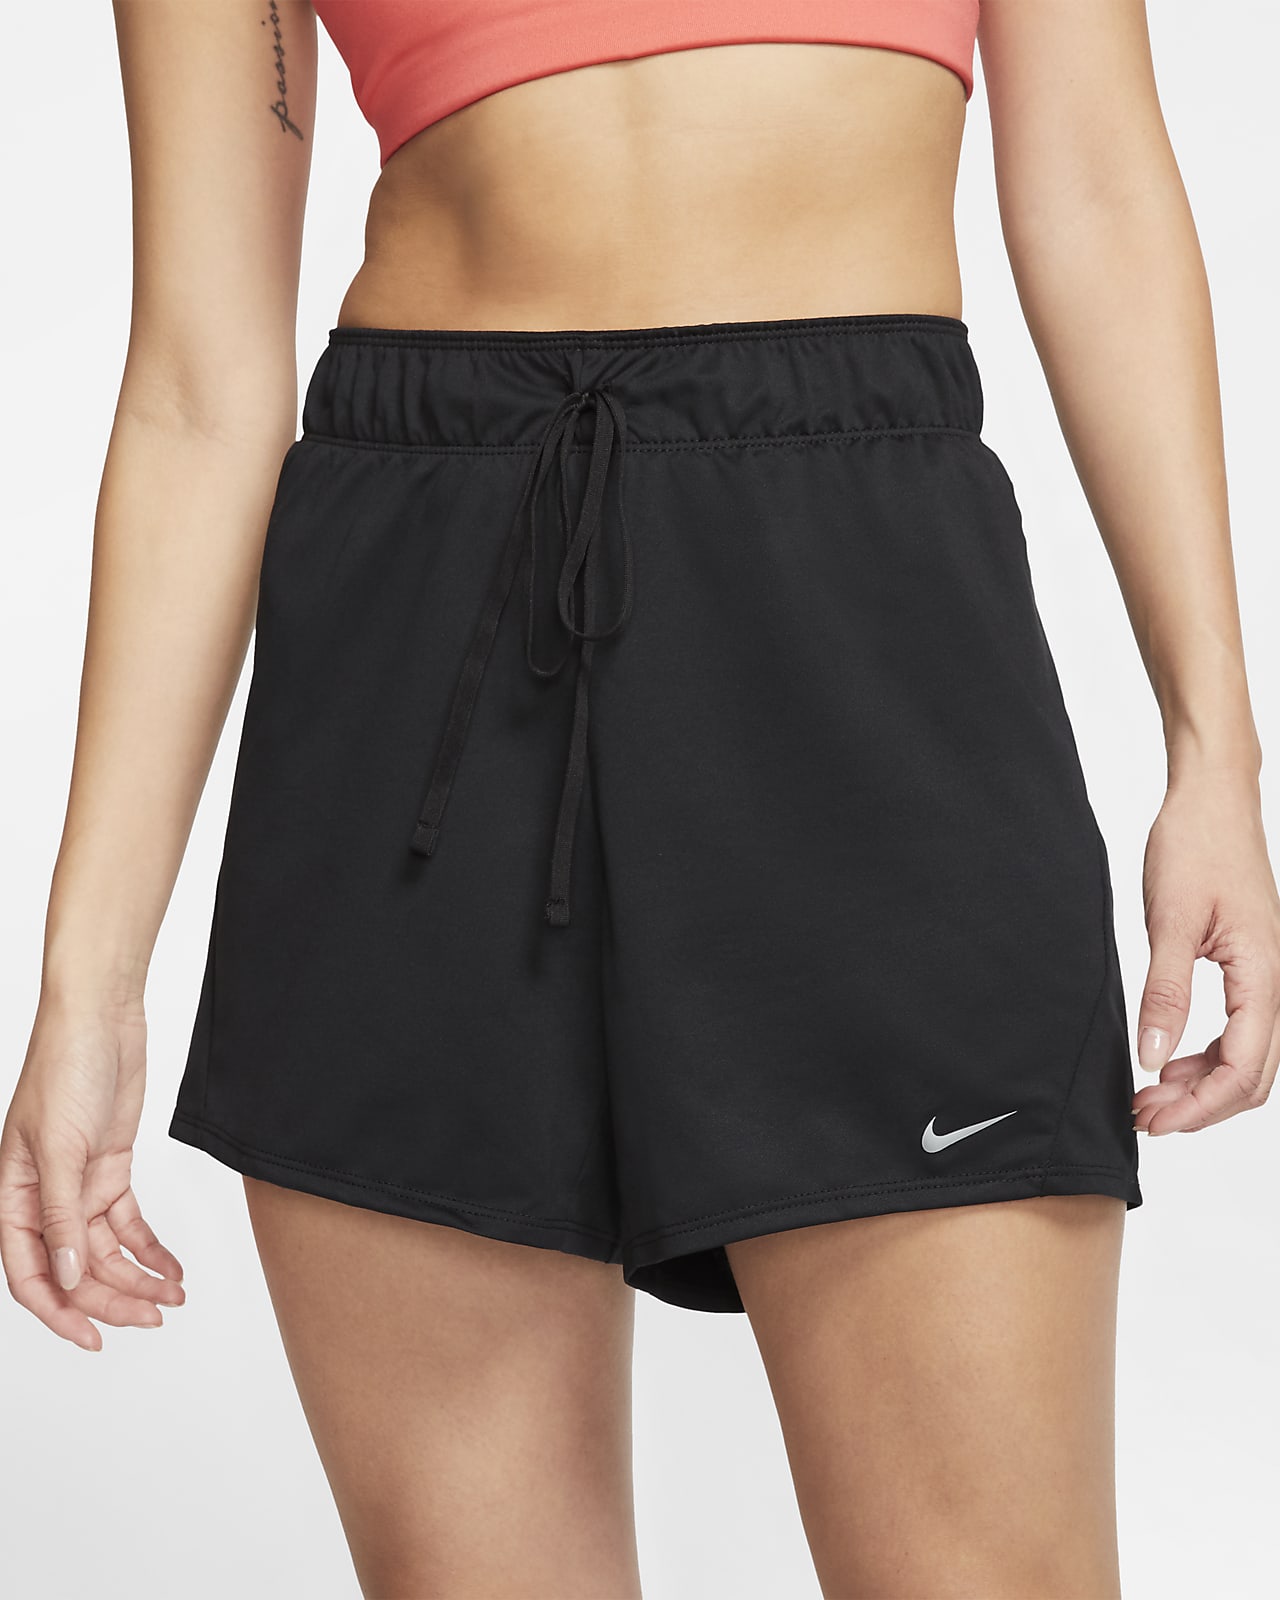 nike dri fit shorts and top